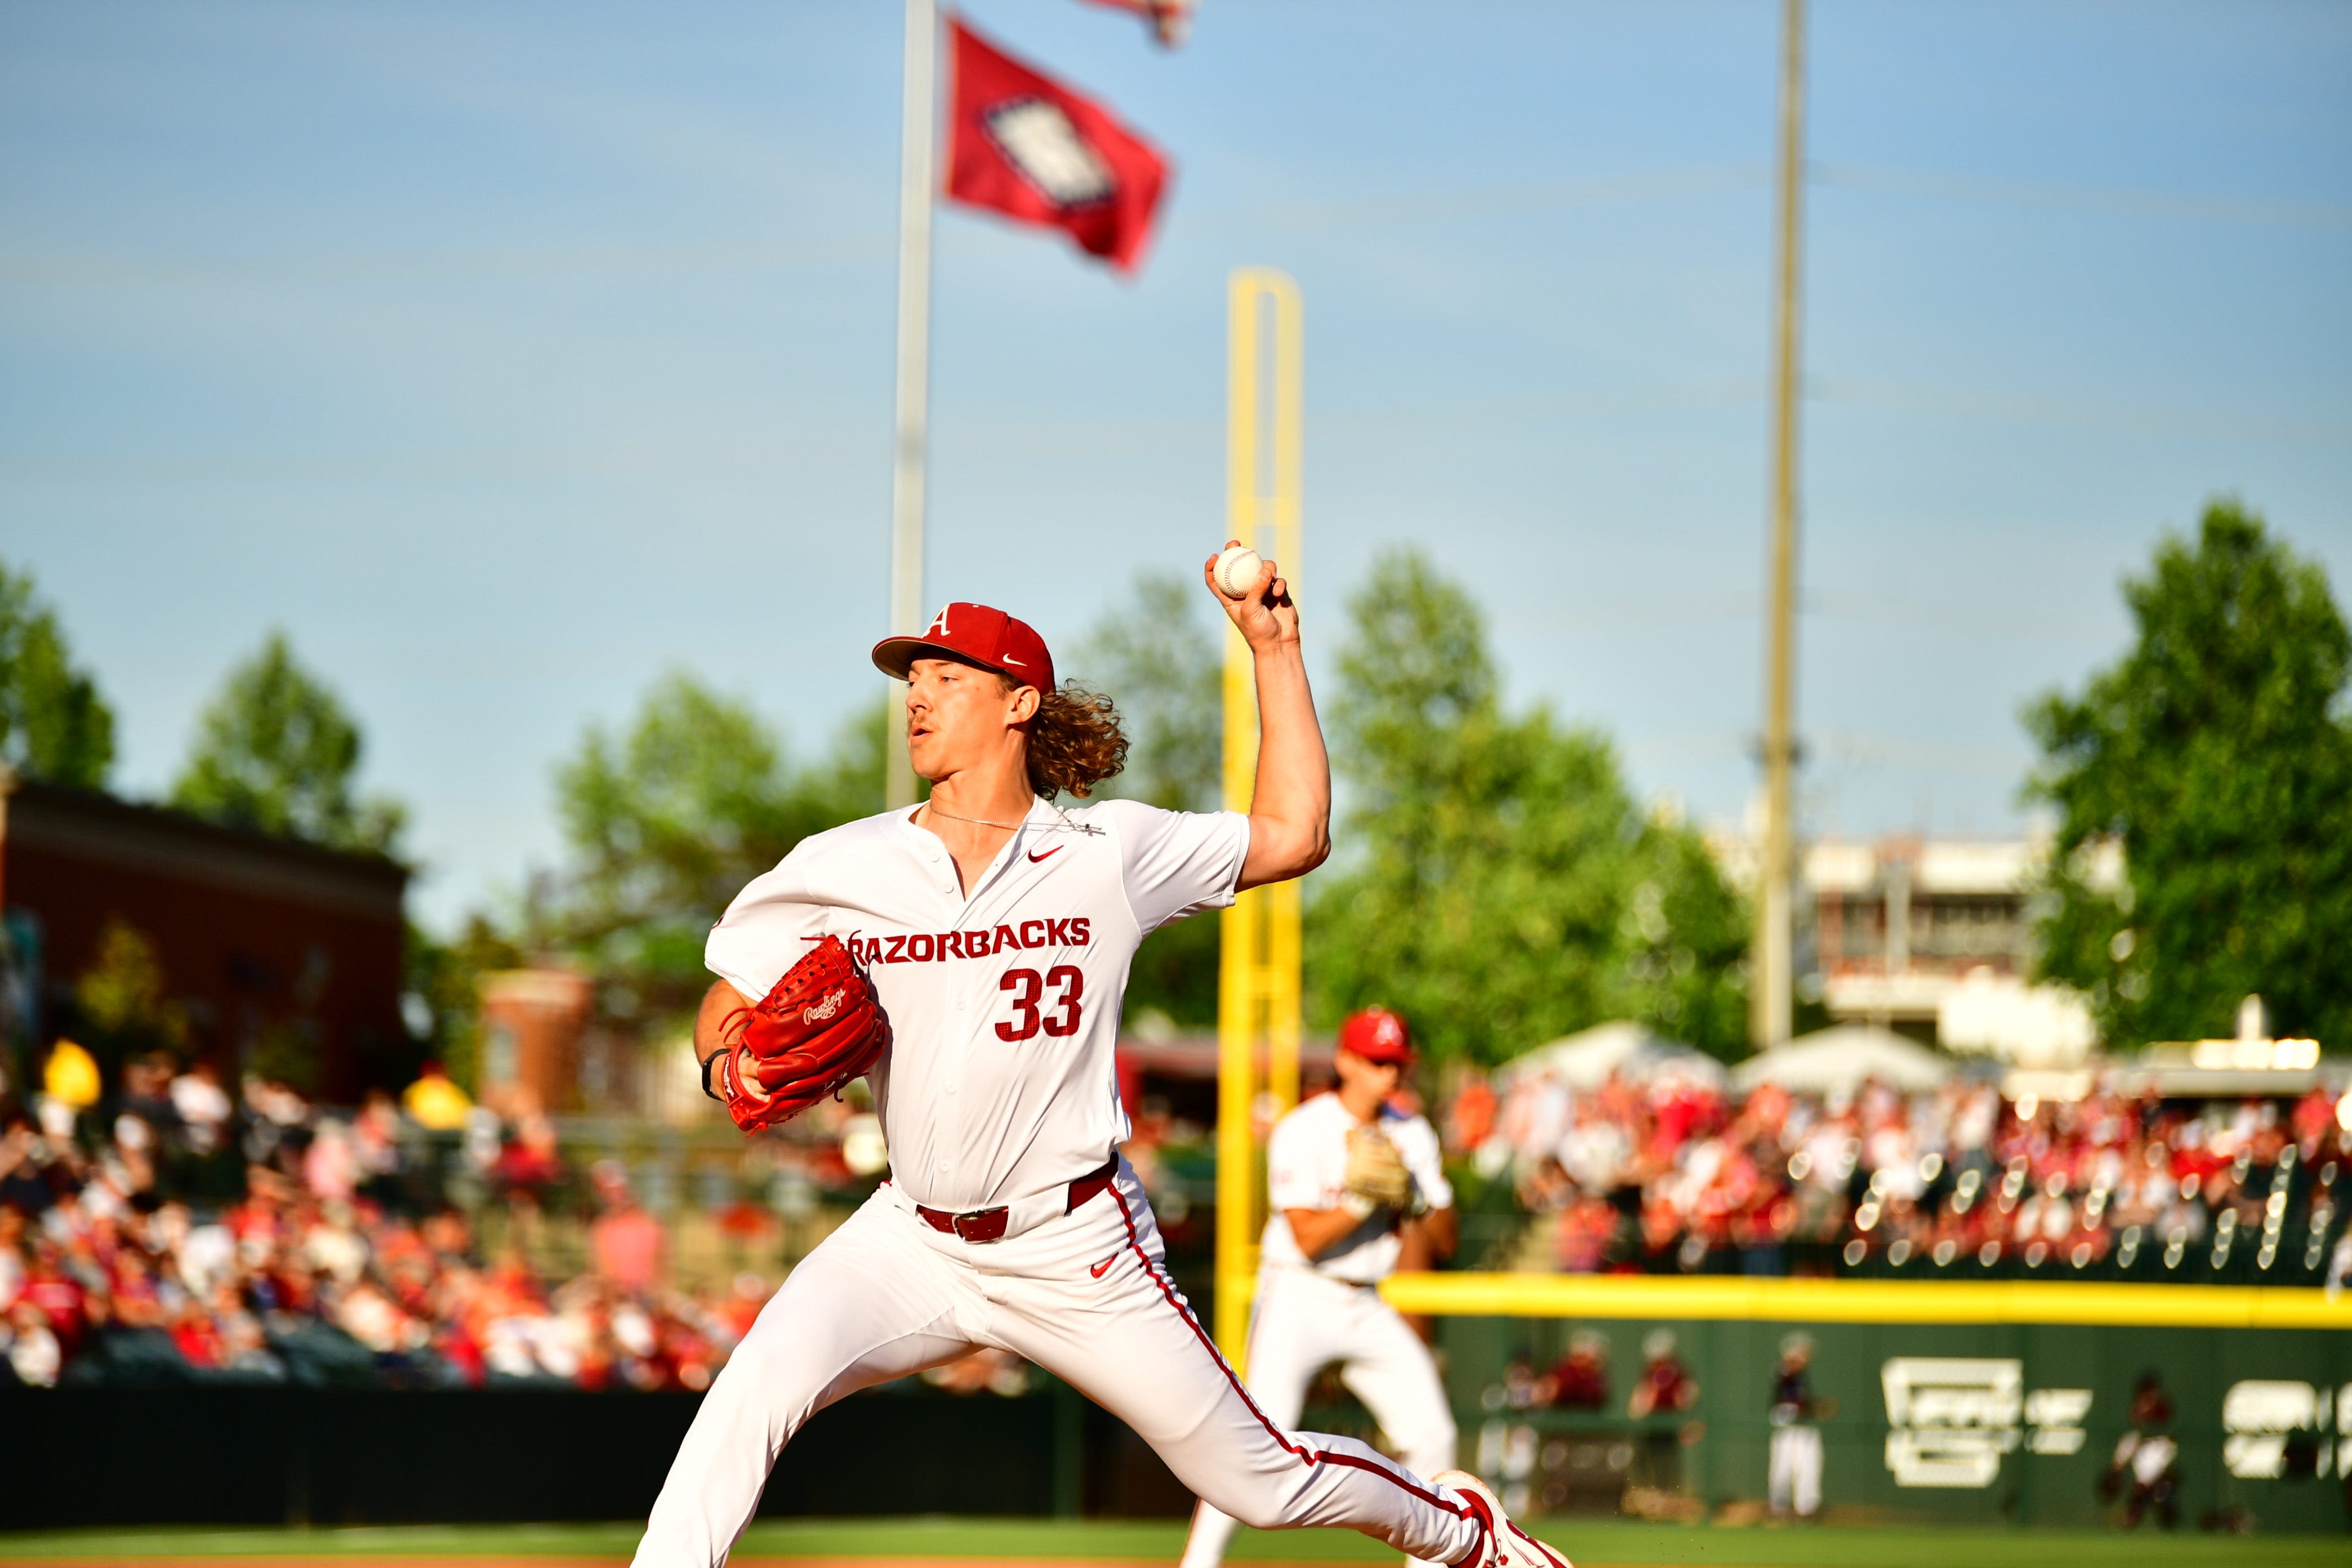 Hagen Smith strikes out 11, Arkansas baseball rallies past Mississippi State in series opener